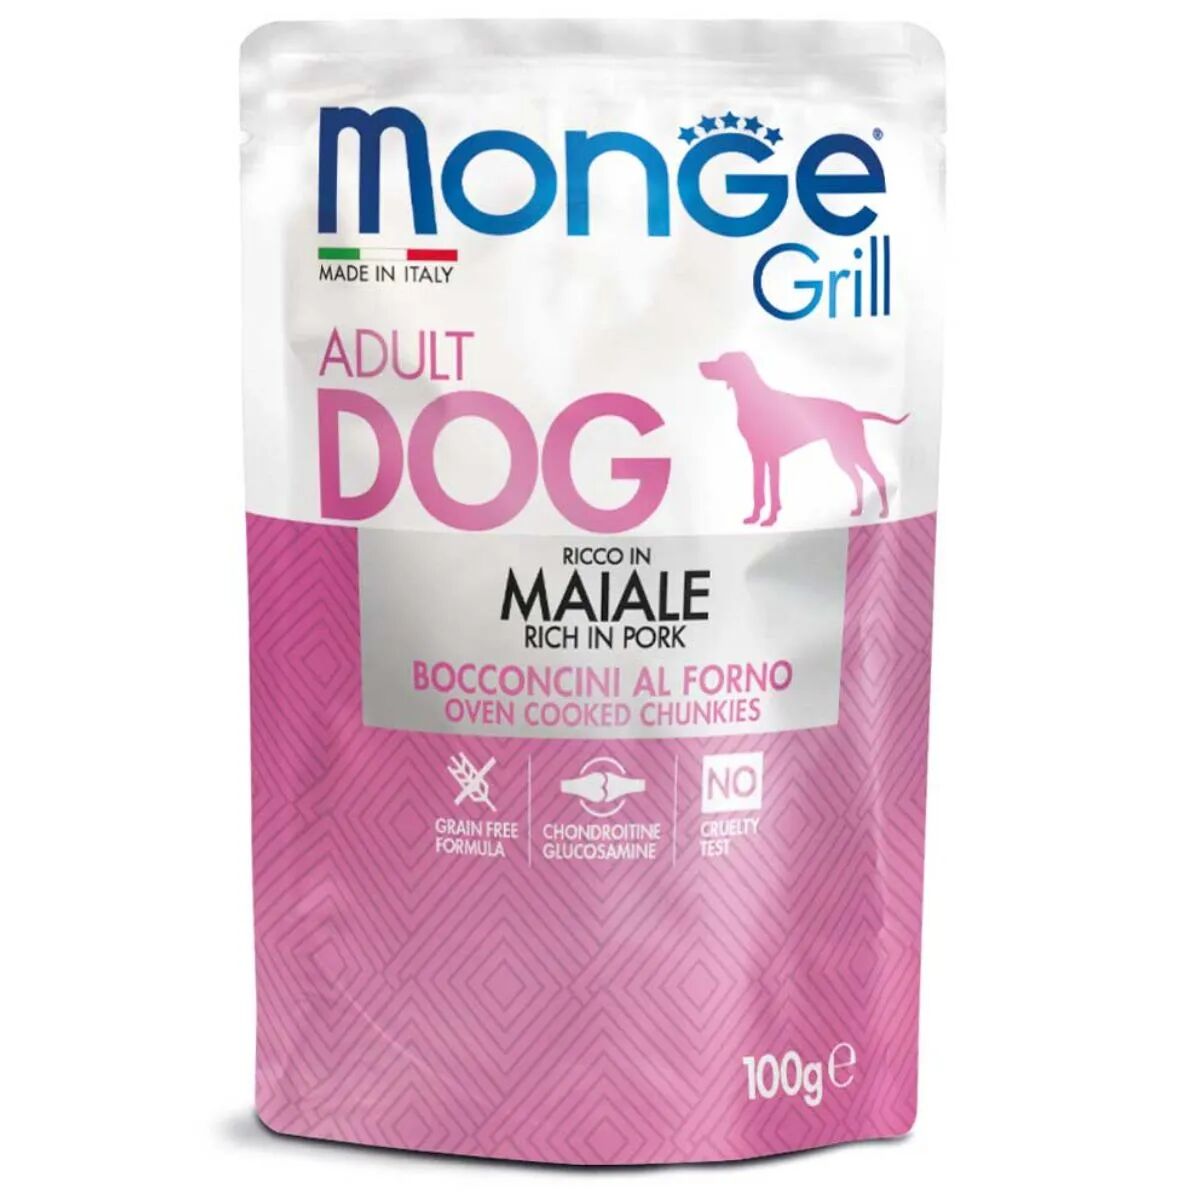 MONGE Grill Dog Busta Multipack 24x100G MAIALE